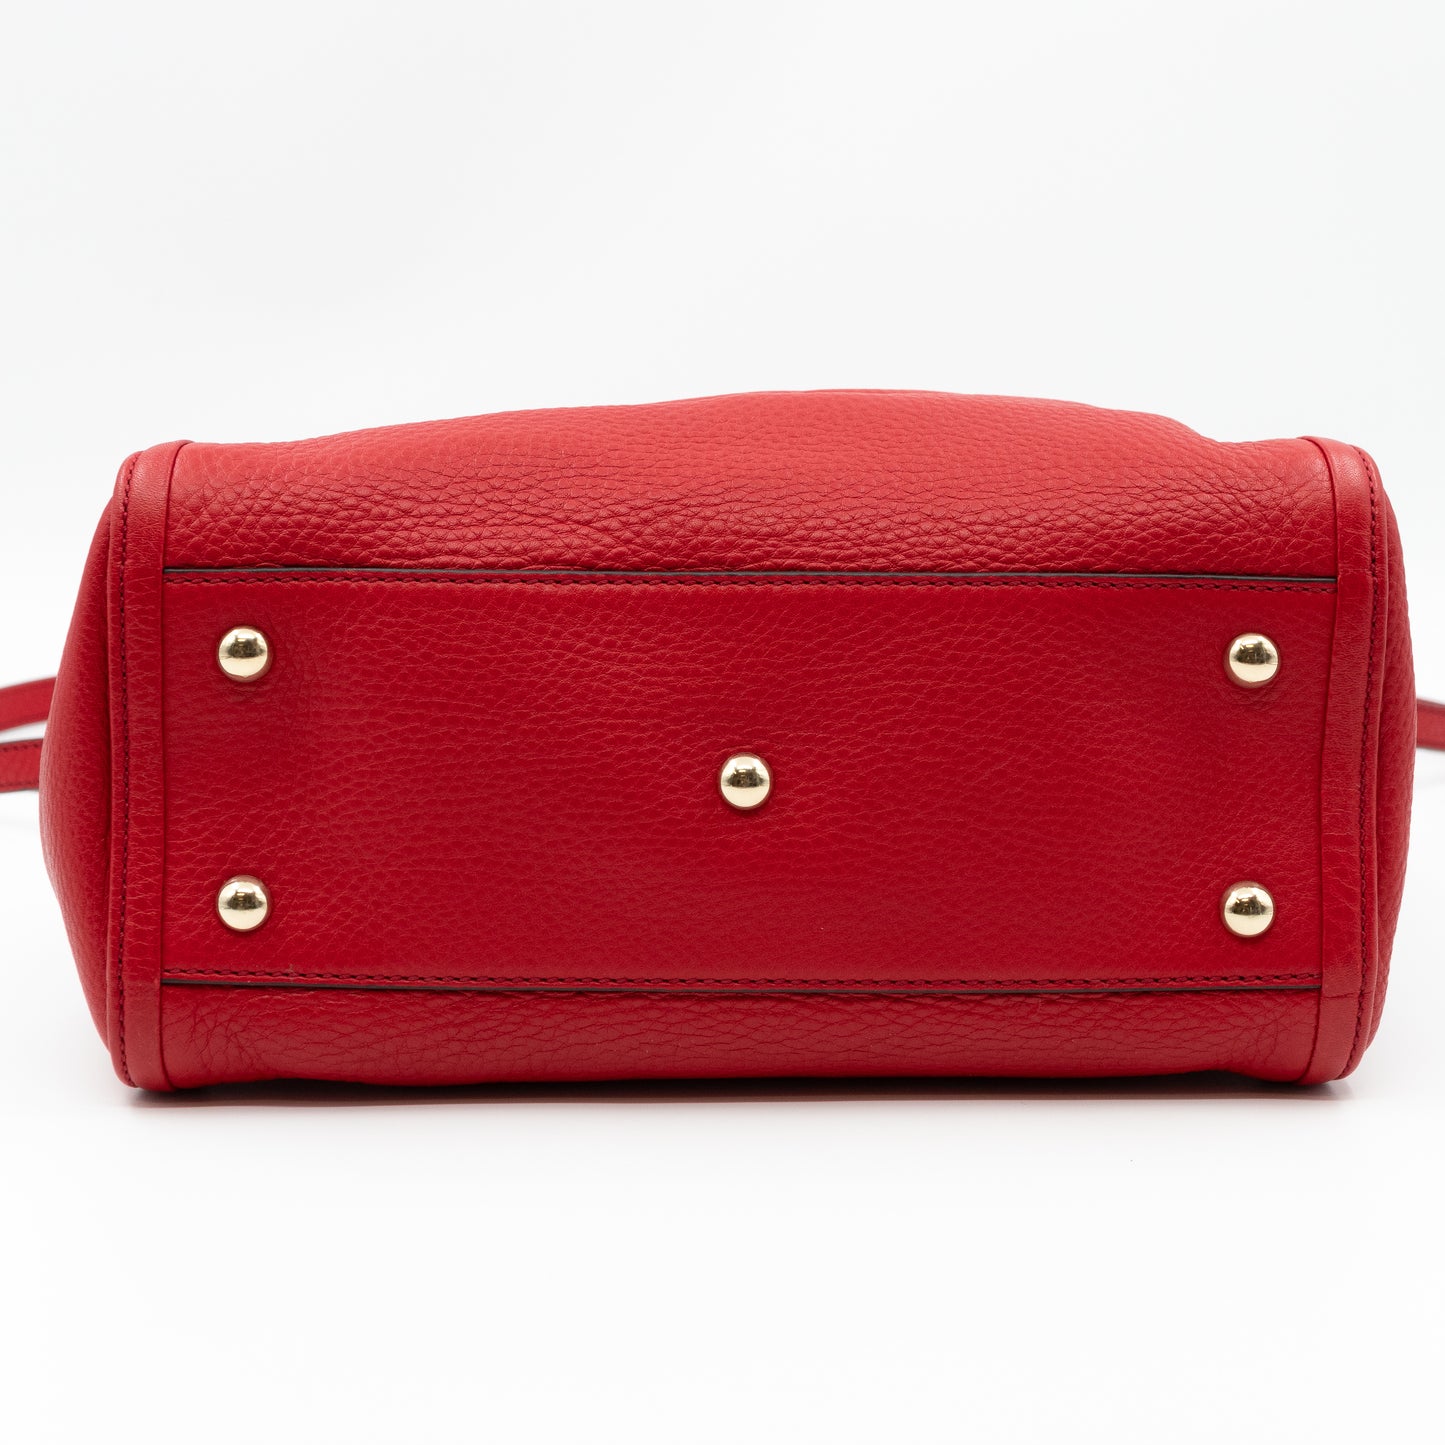 Soho Two Way Tote Red Leather